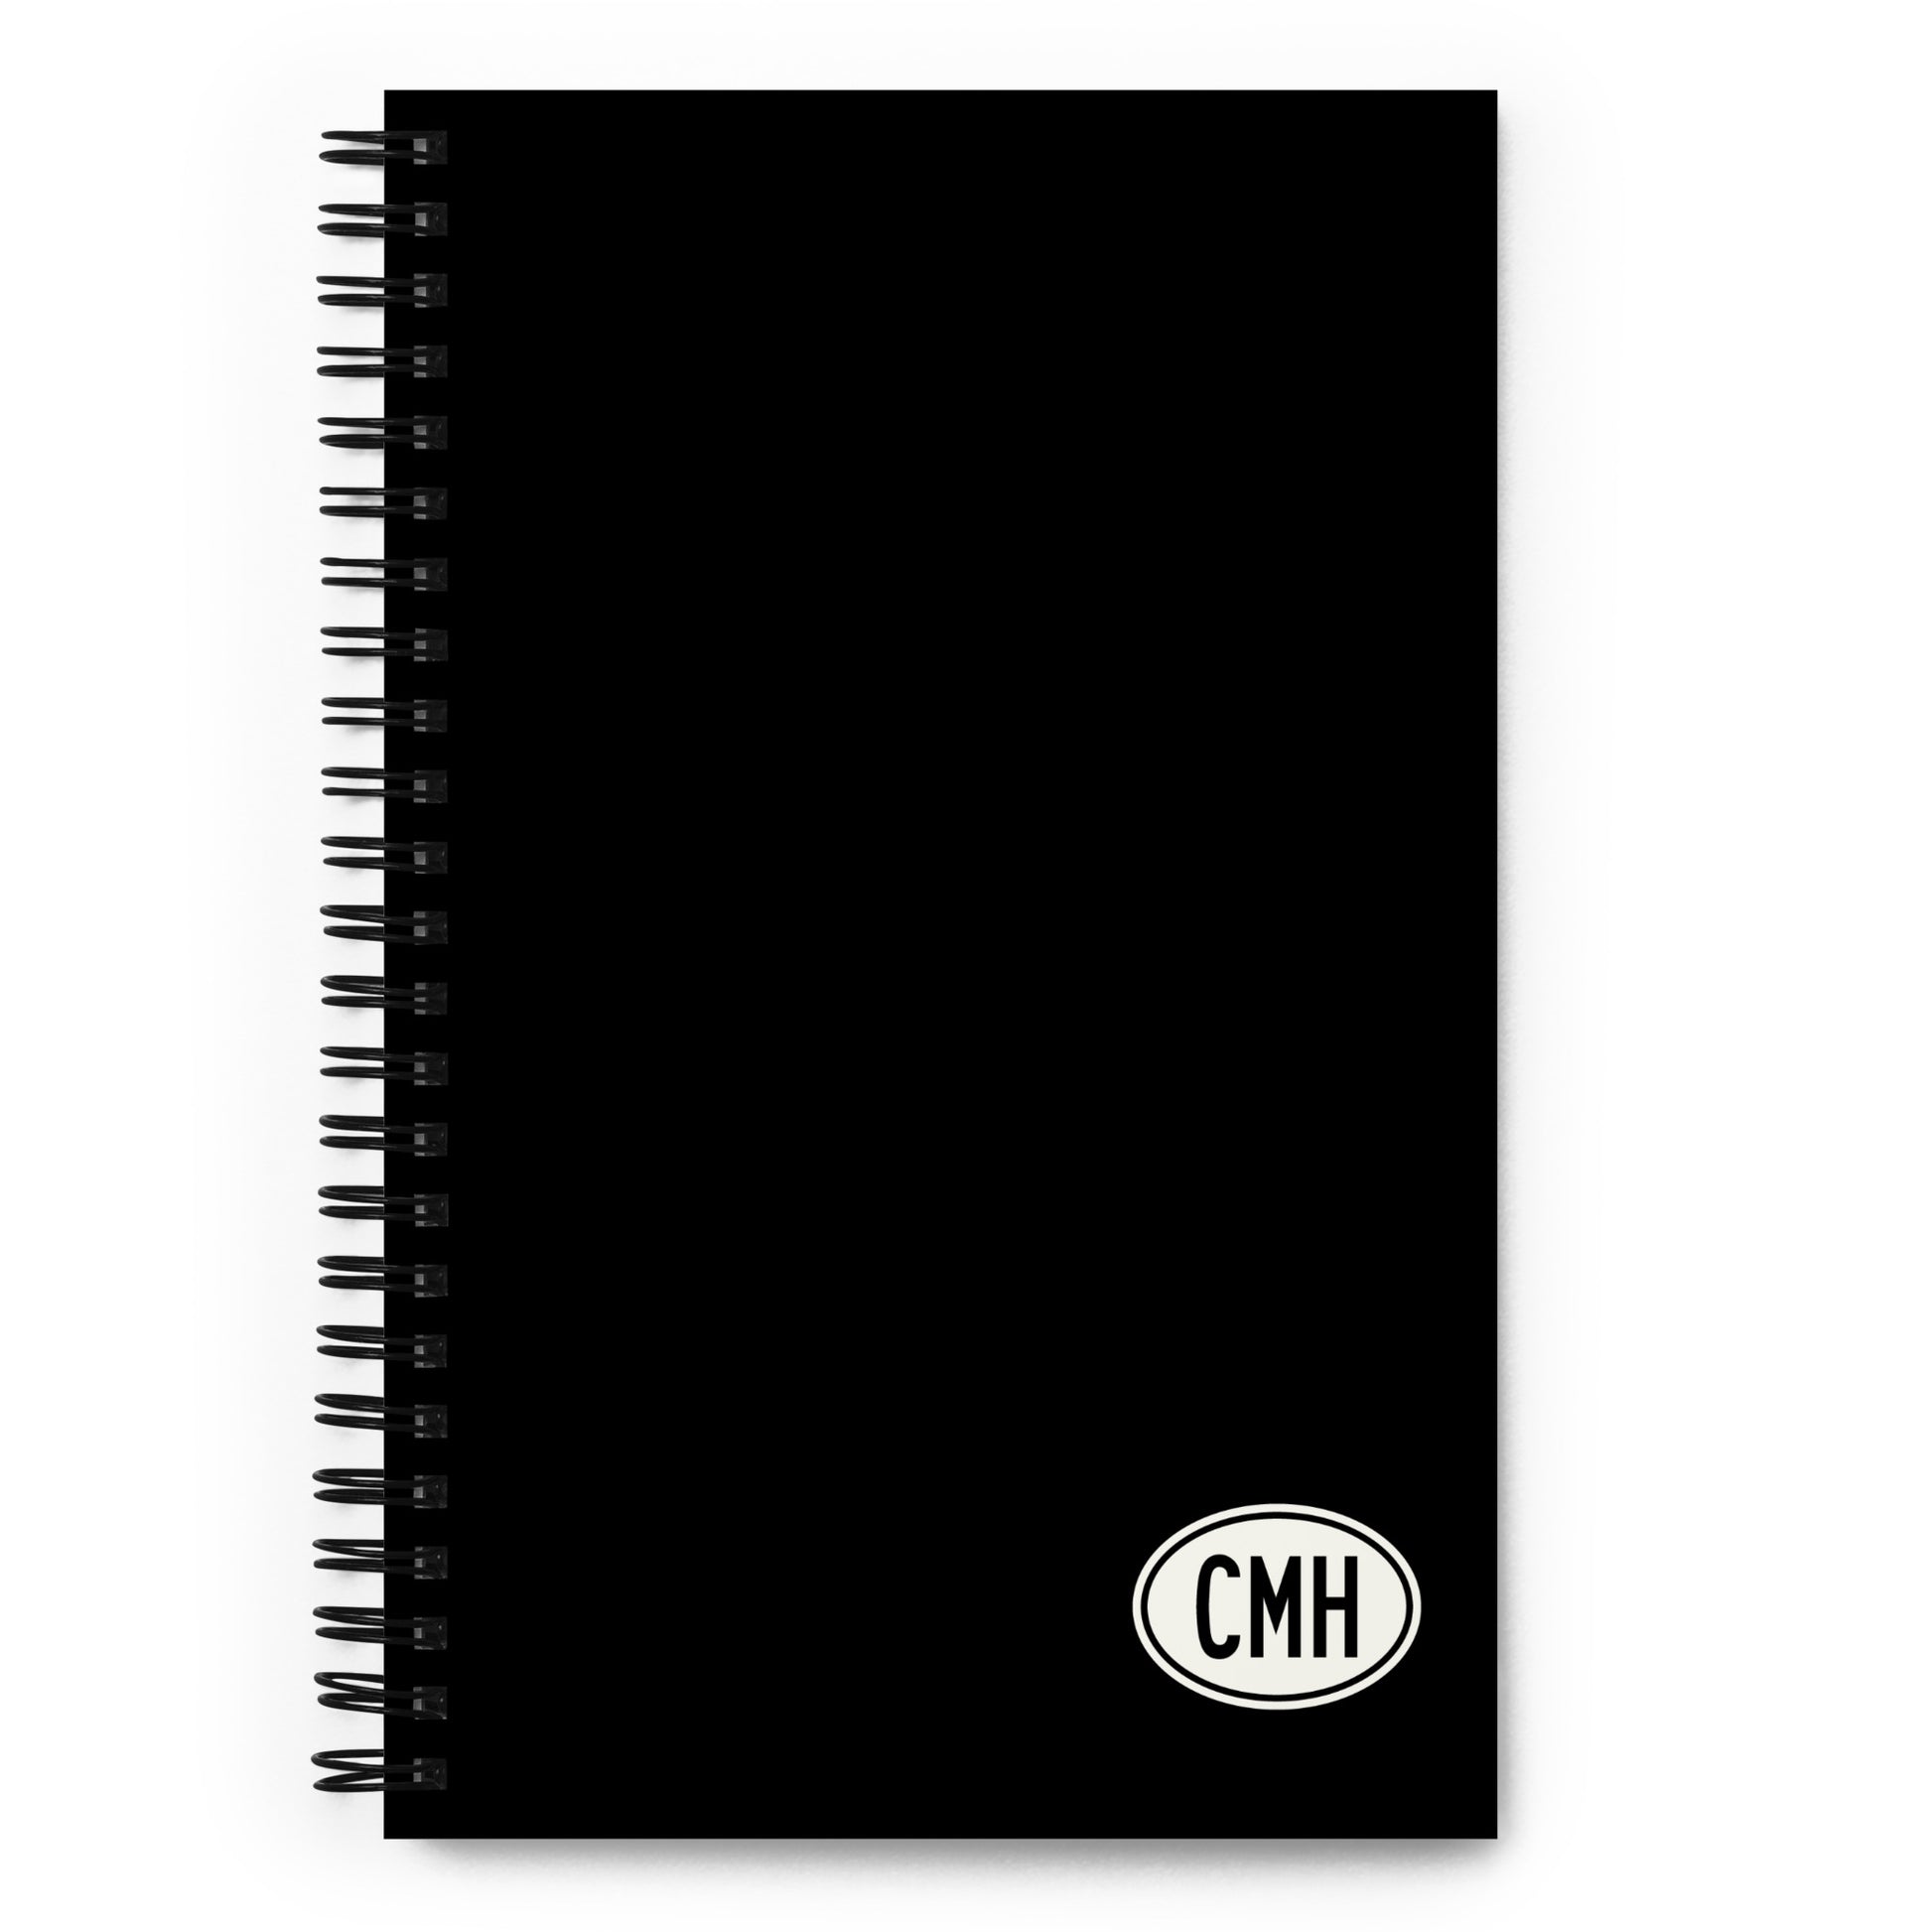 Unique Travel Gift Spiral Notebook - White Oval • CMH Columbus • YHM Designs - Image 01